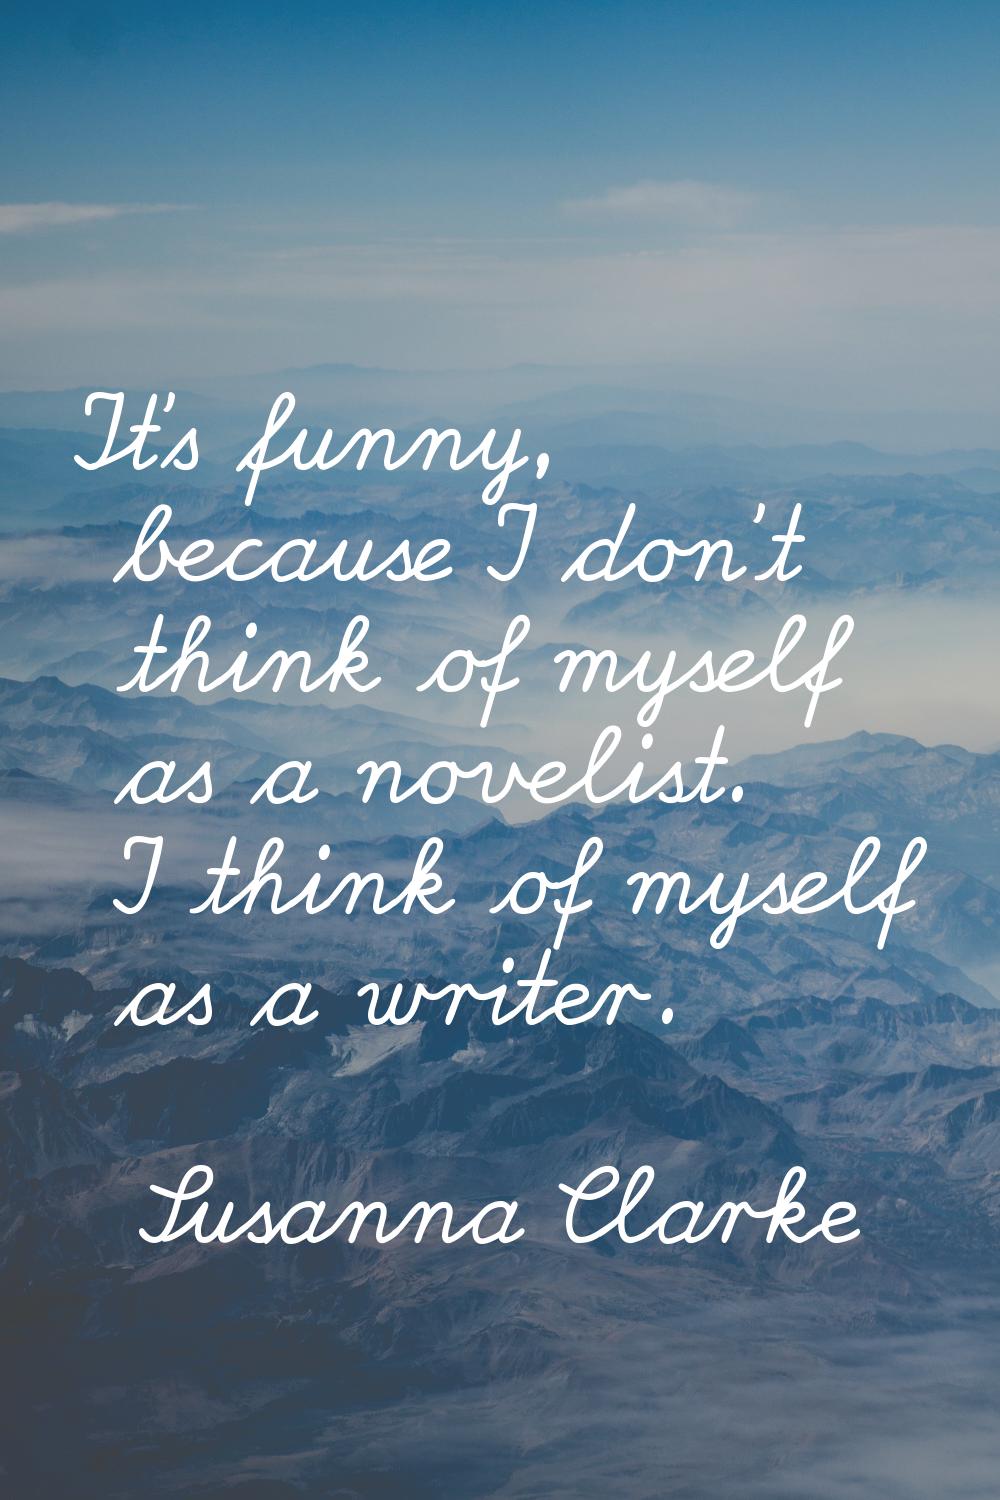 It's funny, because I don't think of myself as a novelist. I think of myself as a writer.